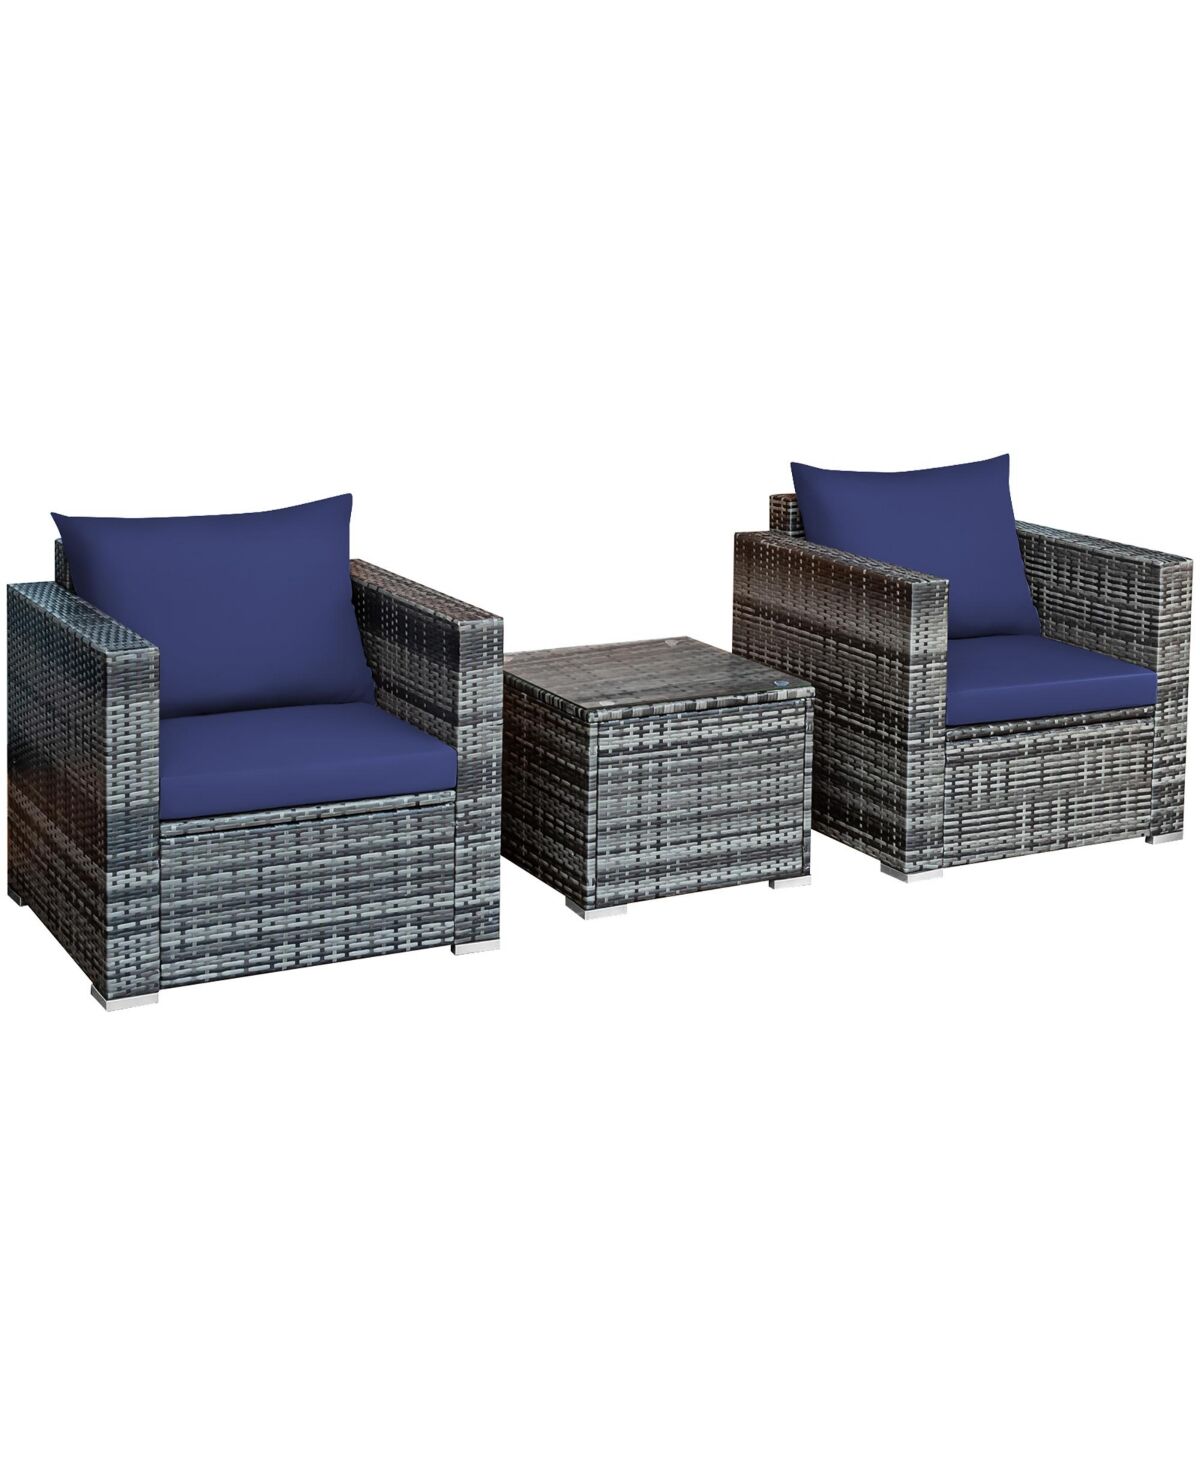 Costway 3 Pc Patio Rattan Furniture Bistro Set Cushioned Sofa Chair Table - Navy